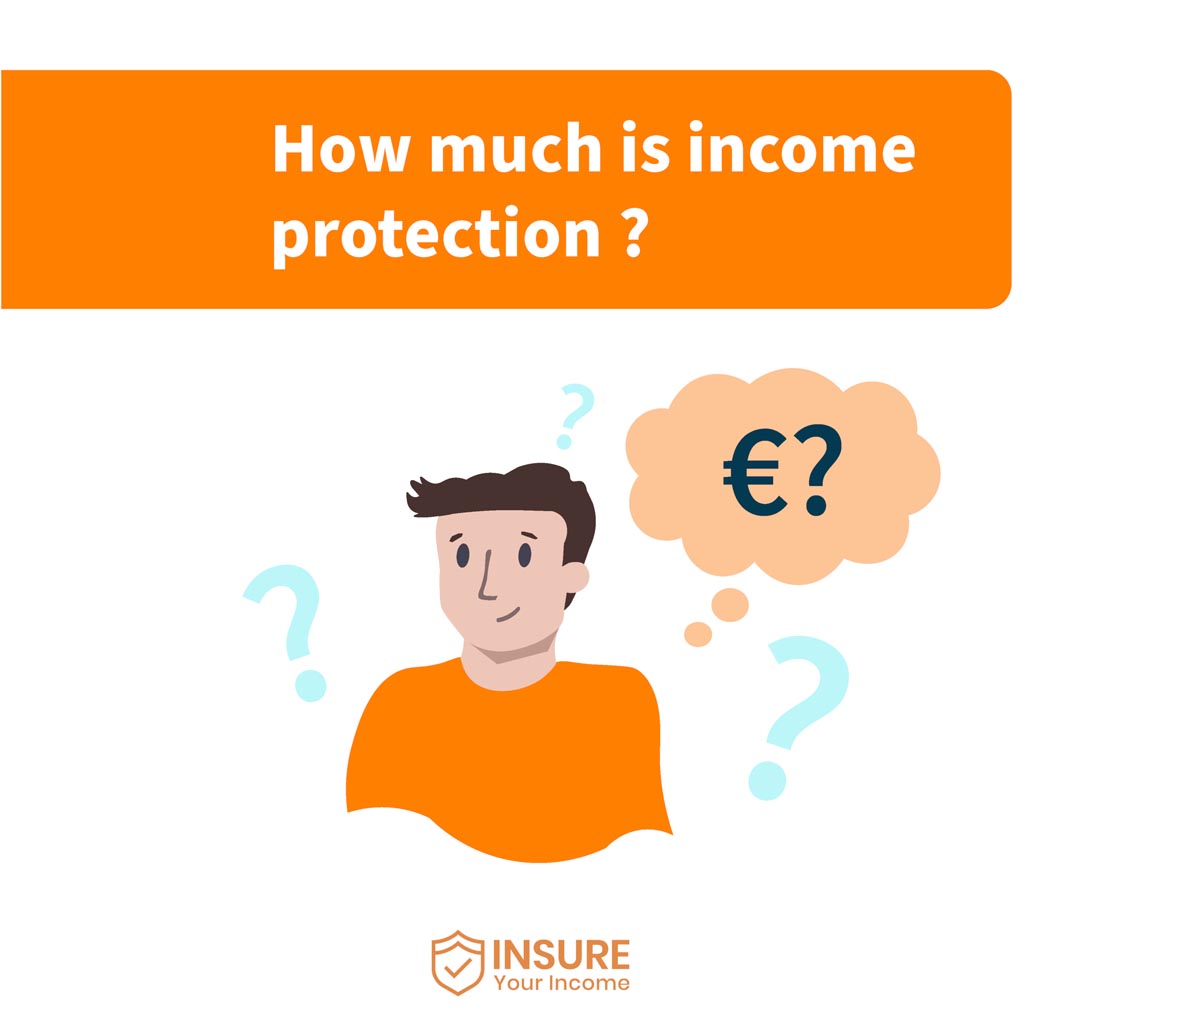 How much does it cost to insure my income